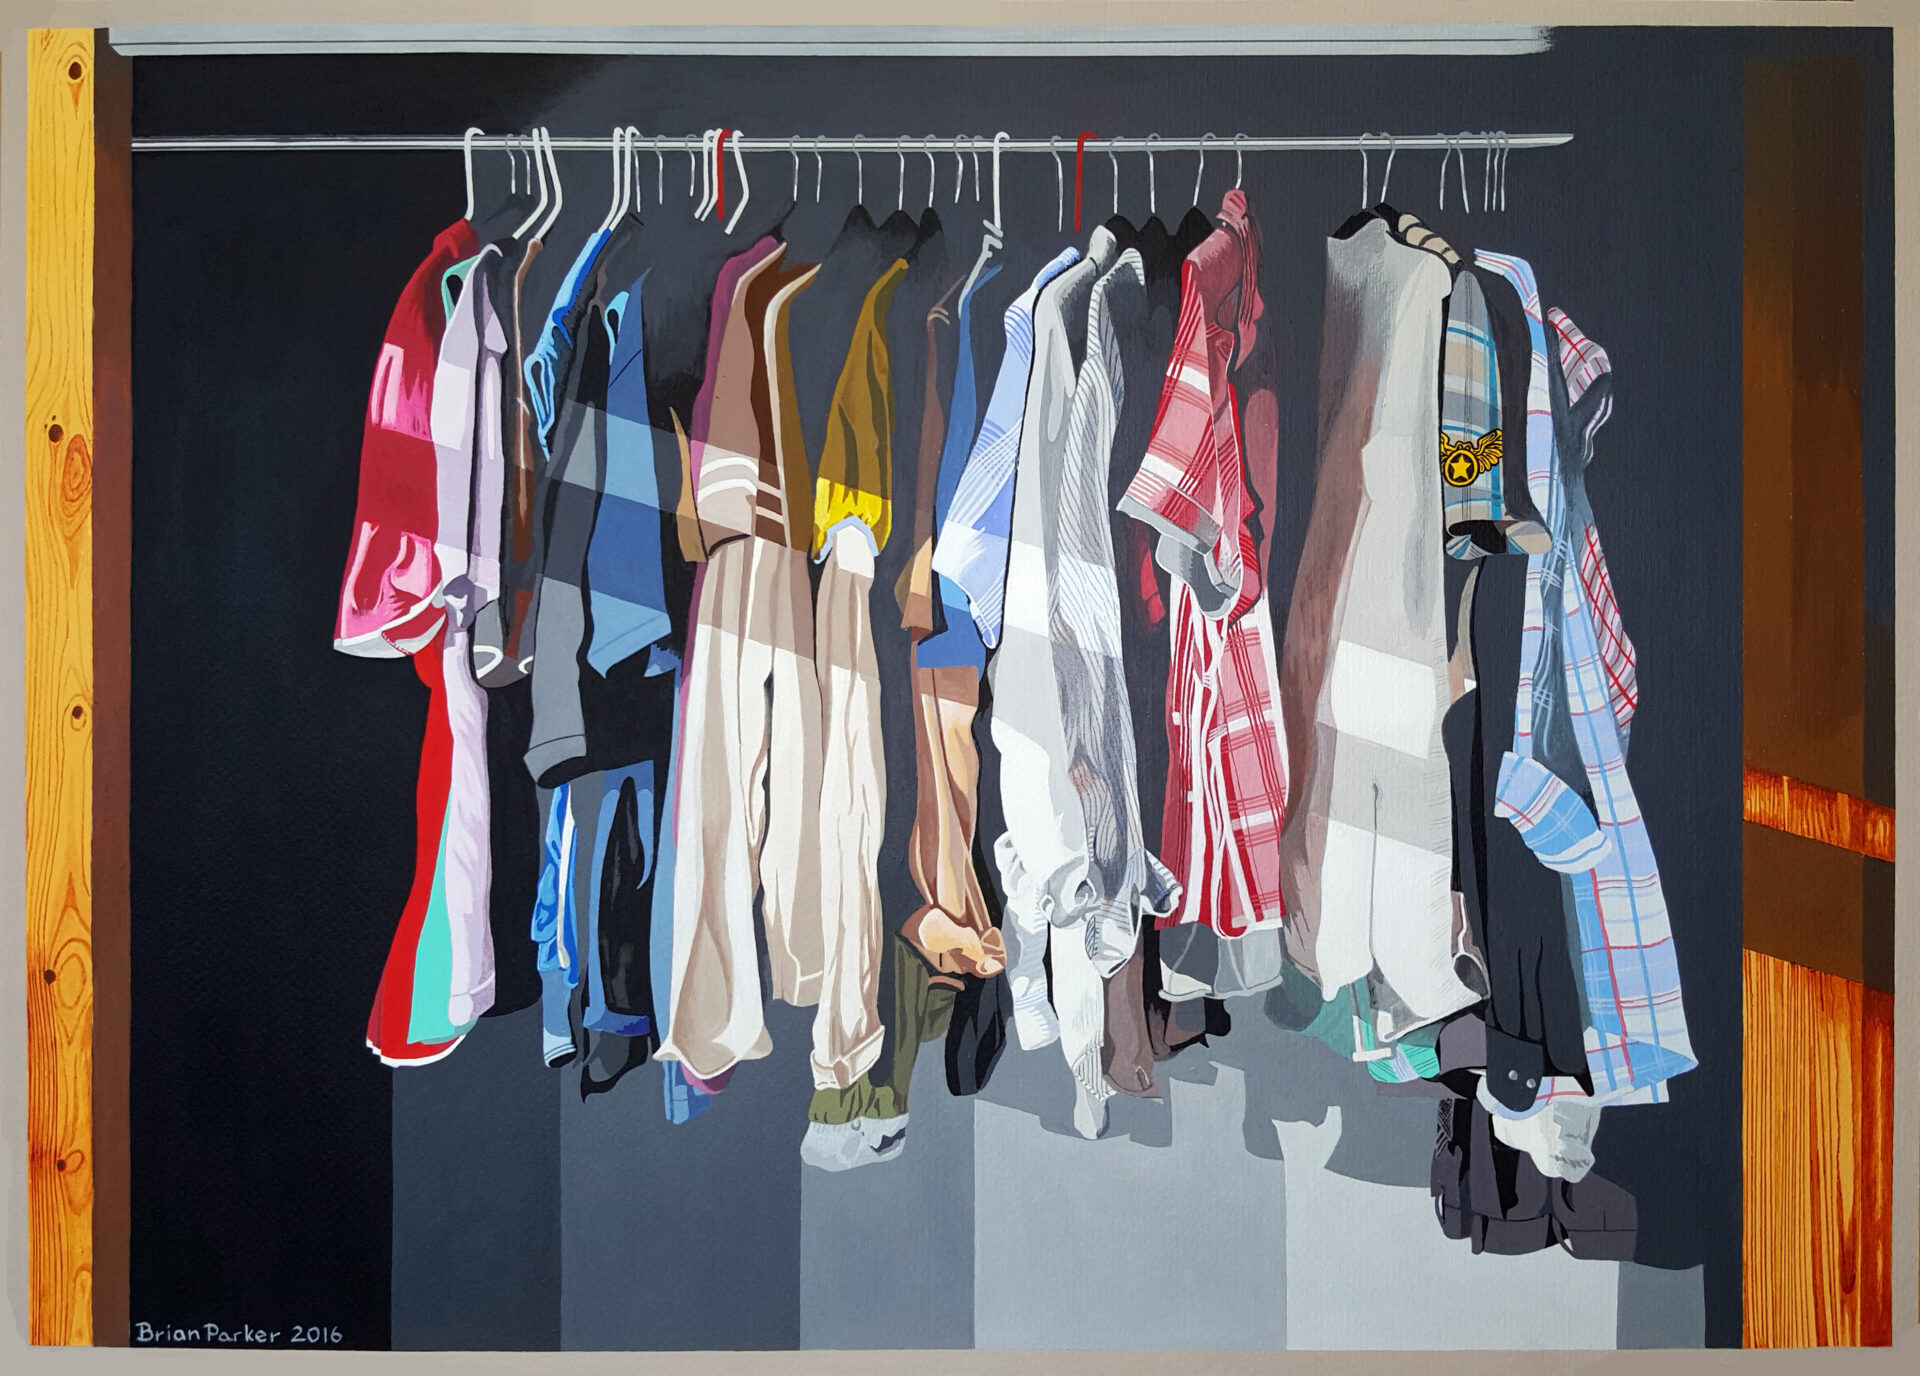 ‘Wardrobe’, 2016 by Brian Parker . Inspiration from the simple home interiors views we see every day but notice and appreciated by the artist Brian Parker.